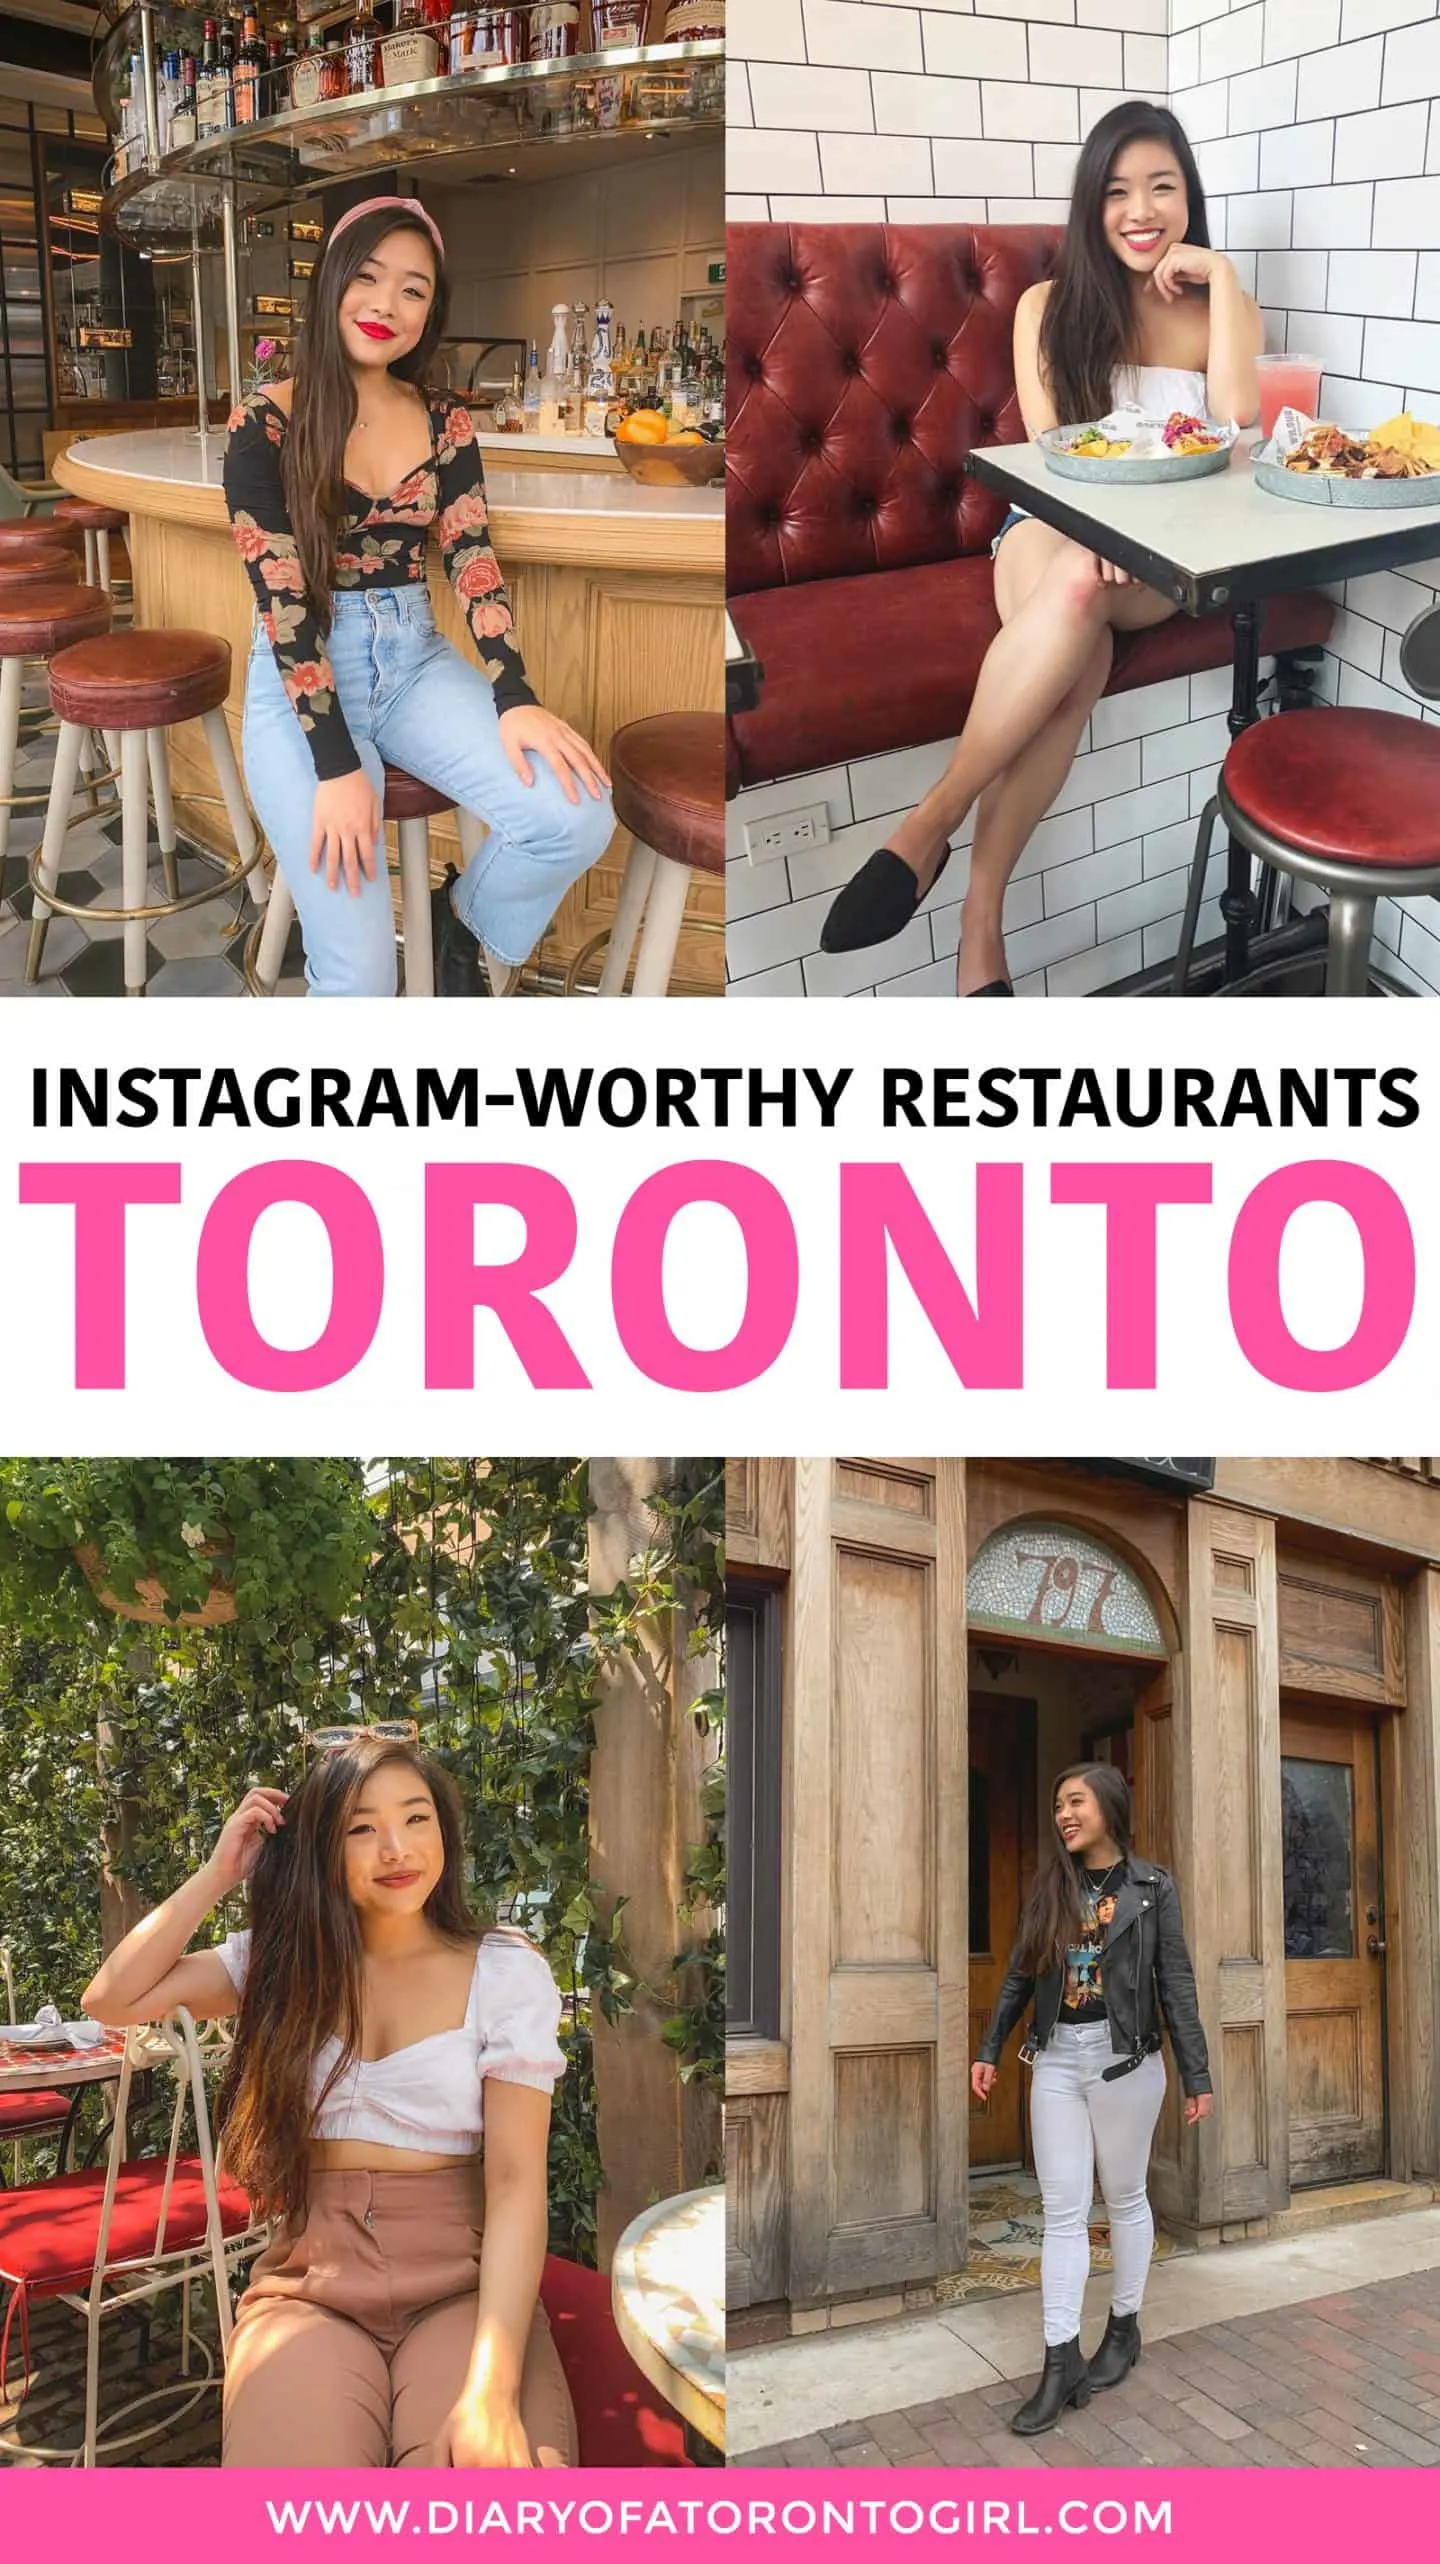 Paying a visit to Toronto and looking for some cool Instagram-worthy spots? Here are some of the most Instagrammable and aesthetically-pleasing restaurants to visit in Toronto, Canada!